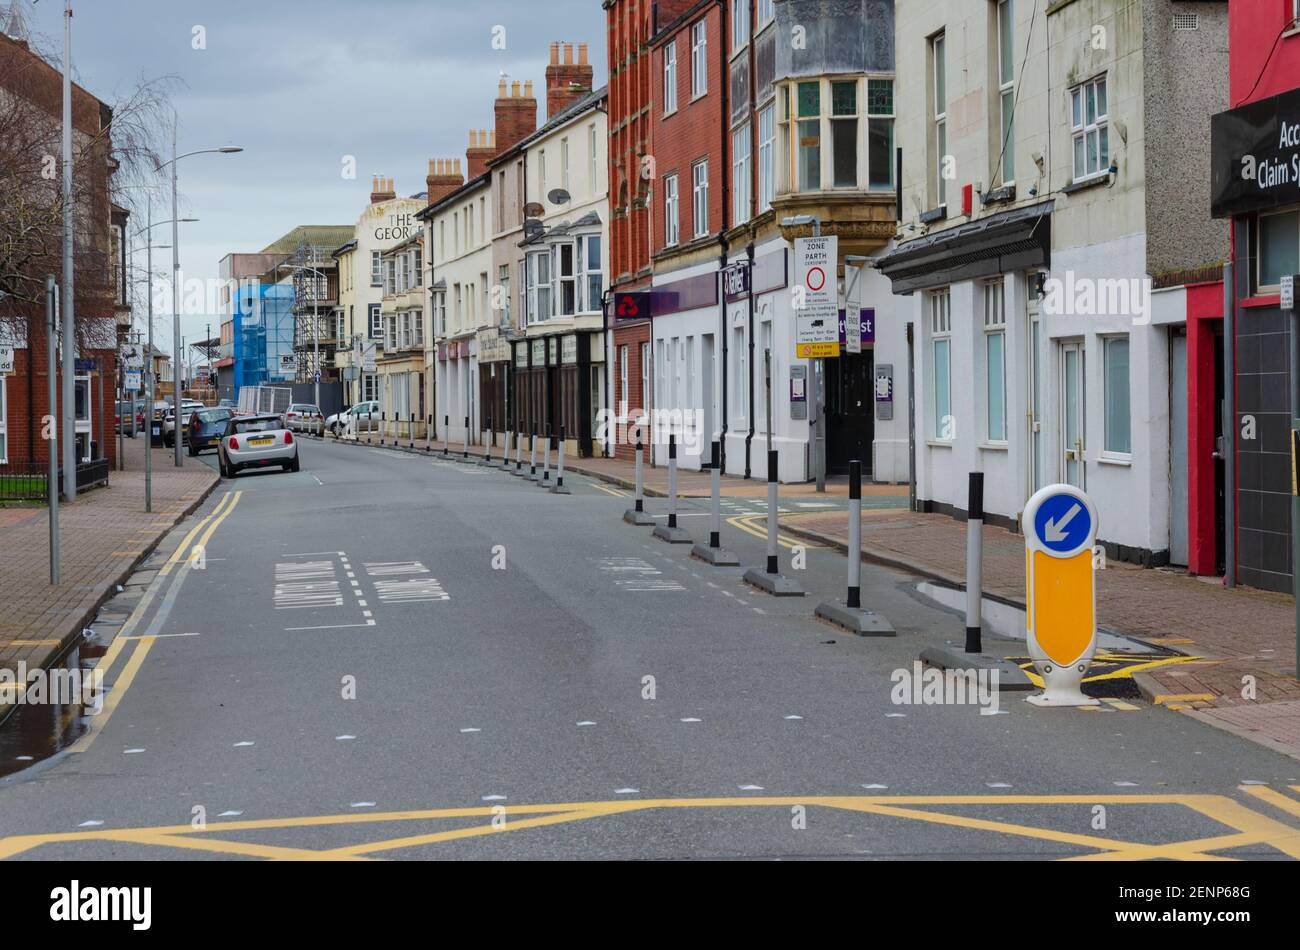 Rhyl, Denbighshire; UK: Feb 21, 2021: Queen Street on a Sunday afternoon with very few people during the pandemic lockdown. Parking bays coned off to Stock Photo